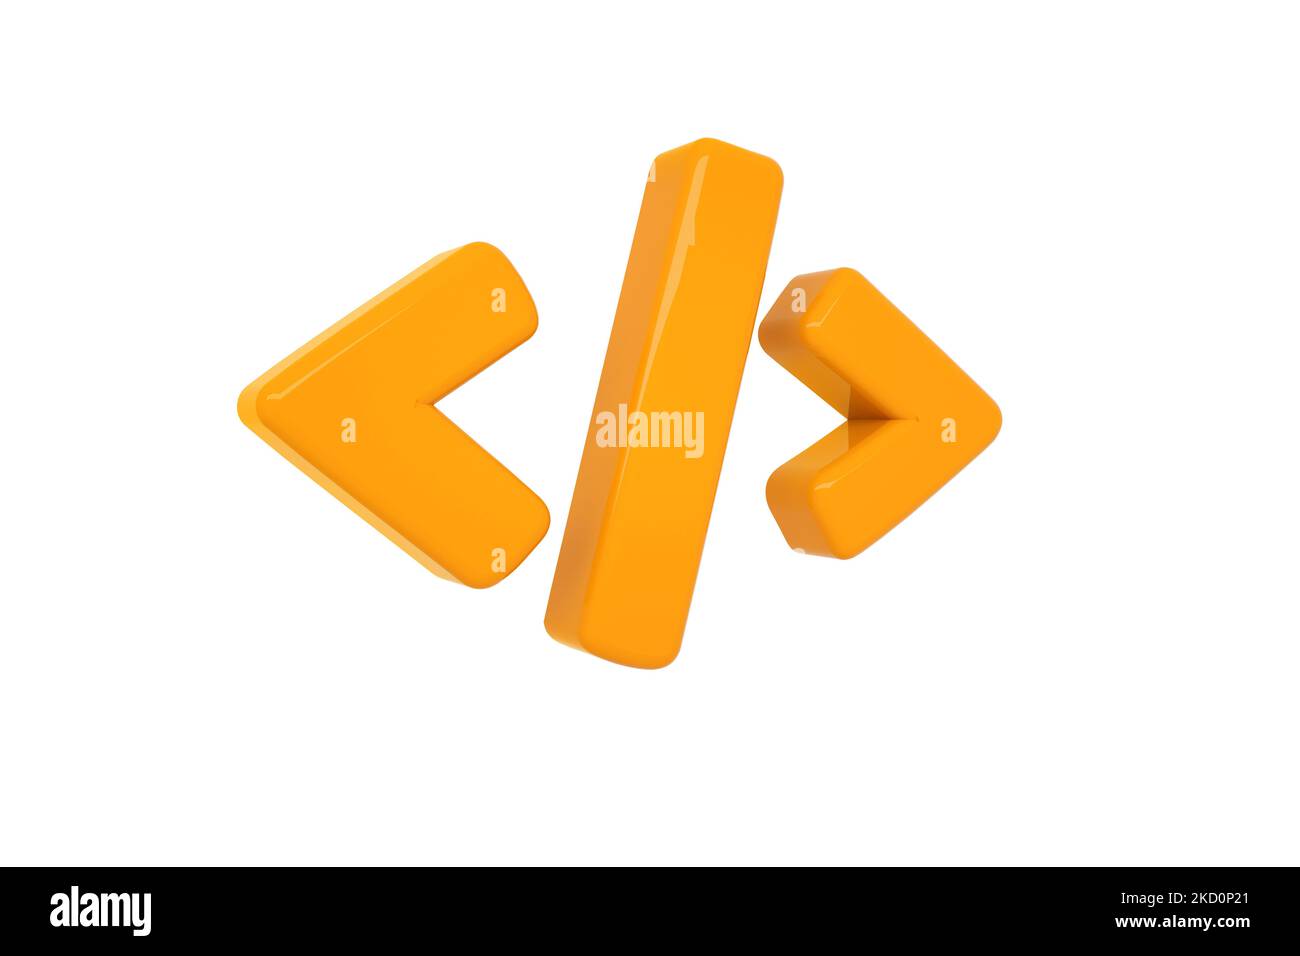 Volumetric glossy hot orange Code icon isolated on white background. 3D rendered digital symbol. Modern icon for website Stock Photo